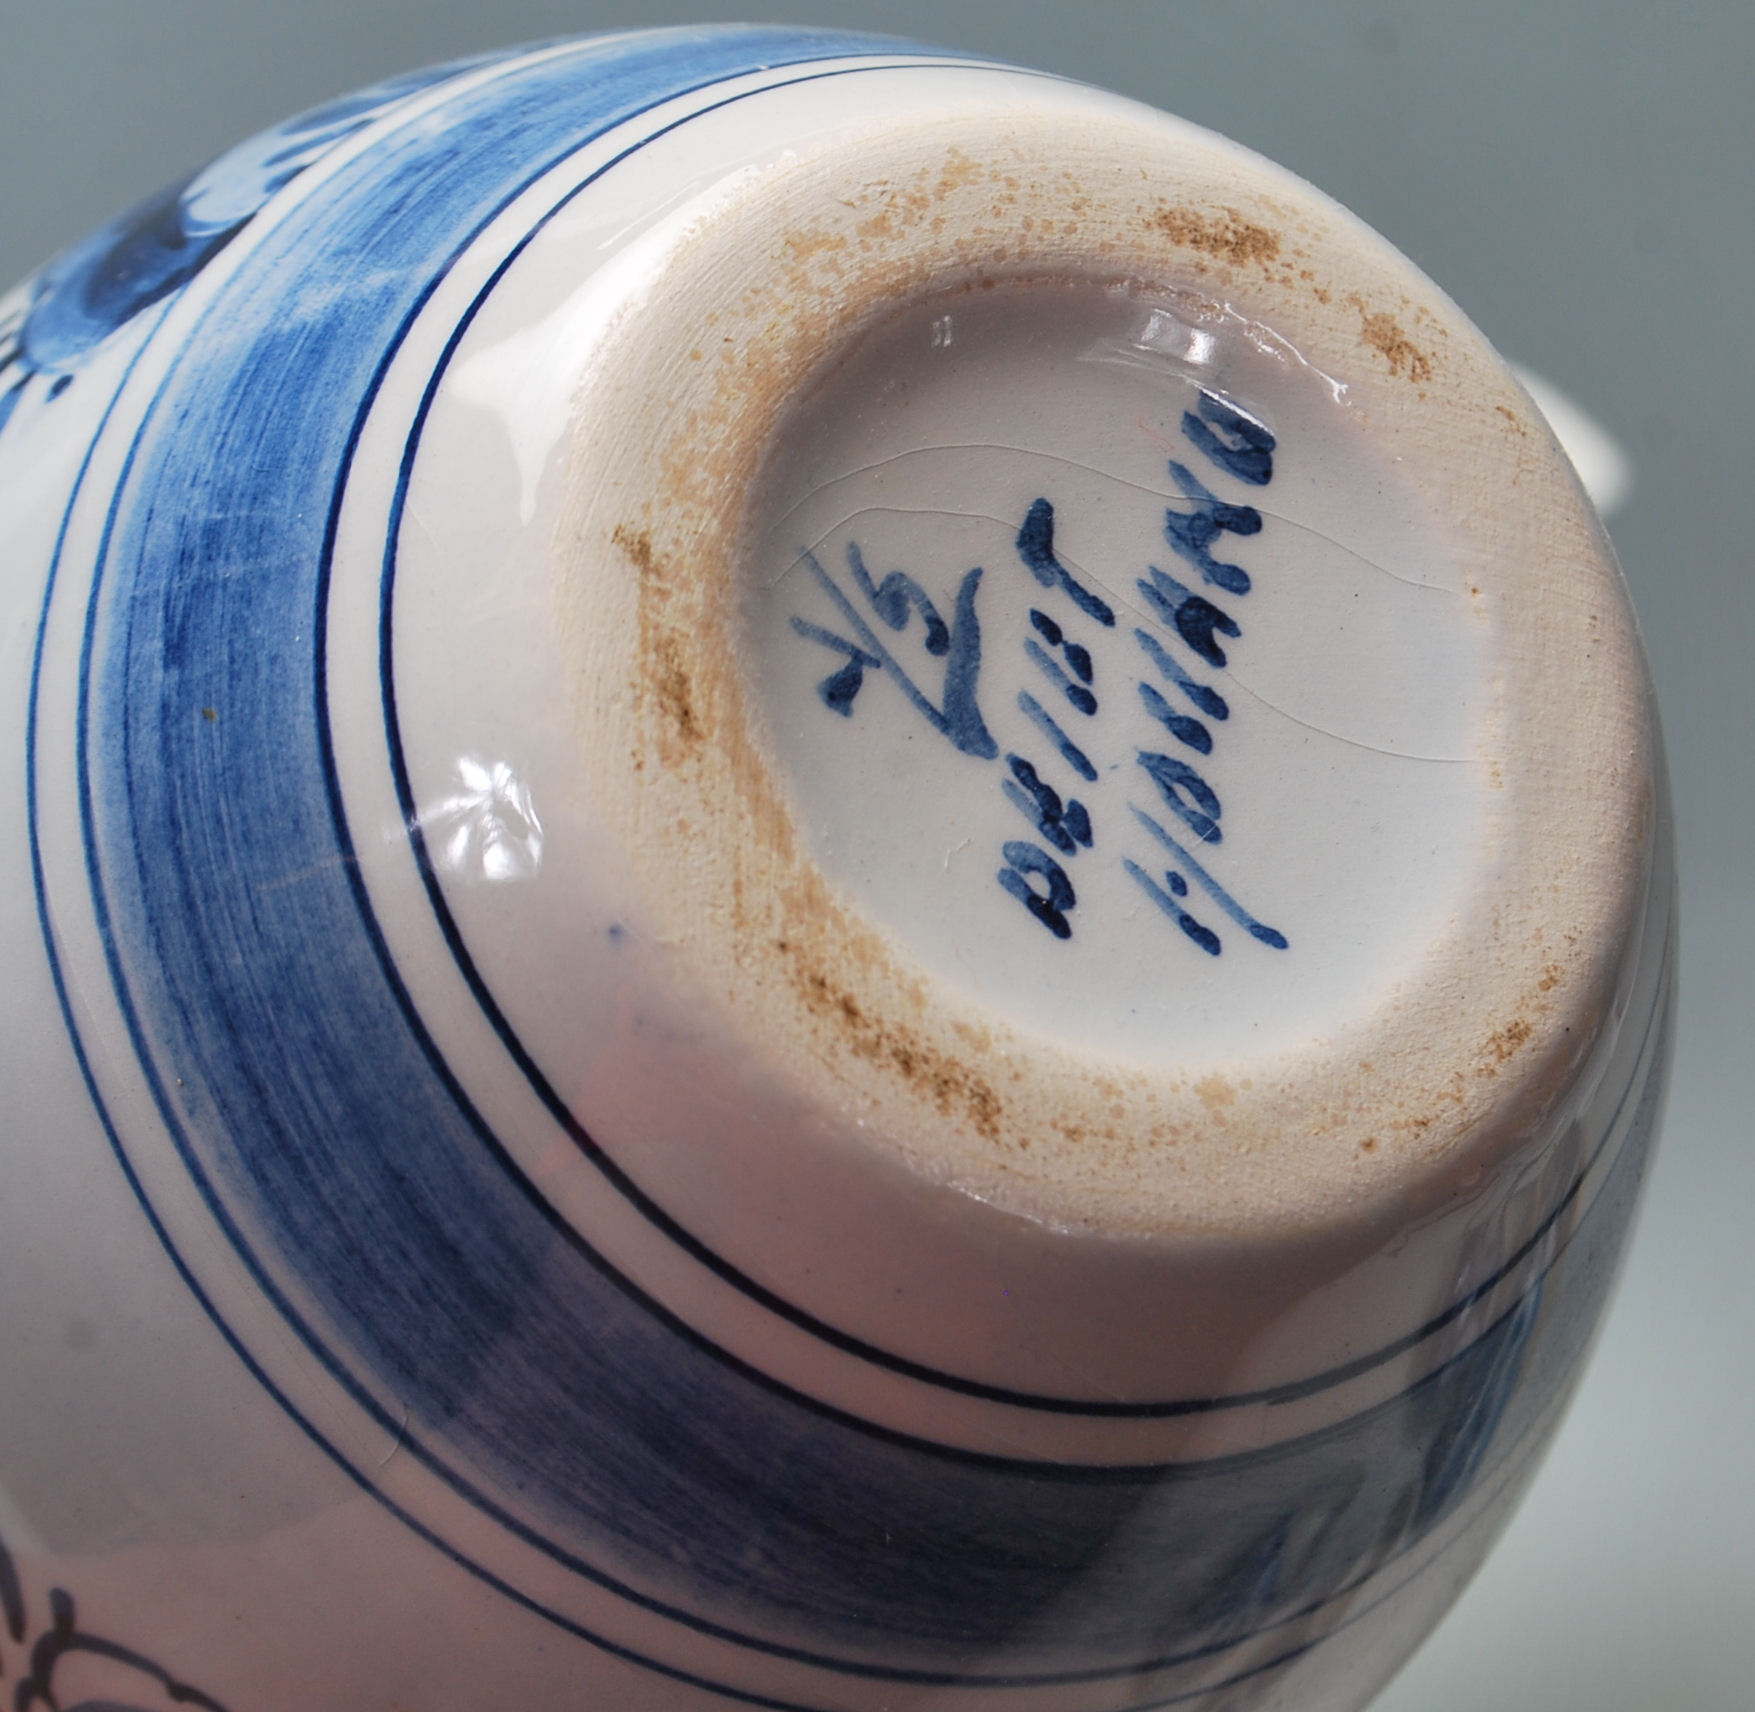 A QUANTITY OF BLUE AND WITH DELFT CERAMIC PORCELAI - Image 10 of 15